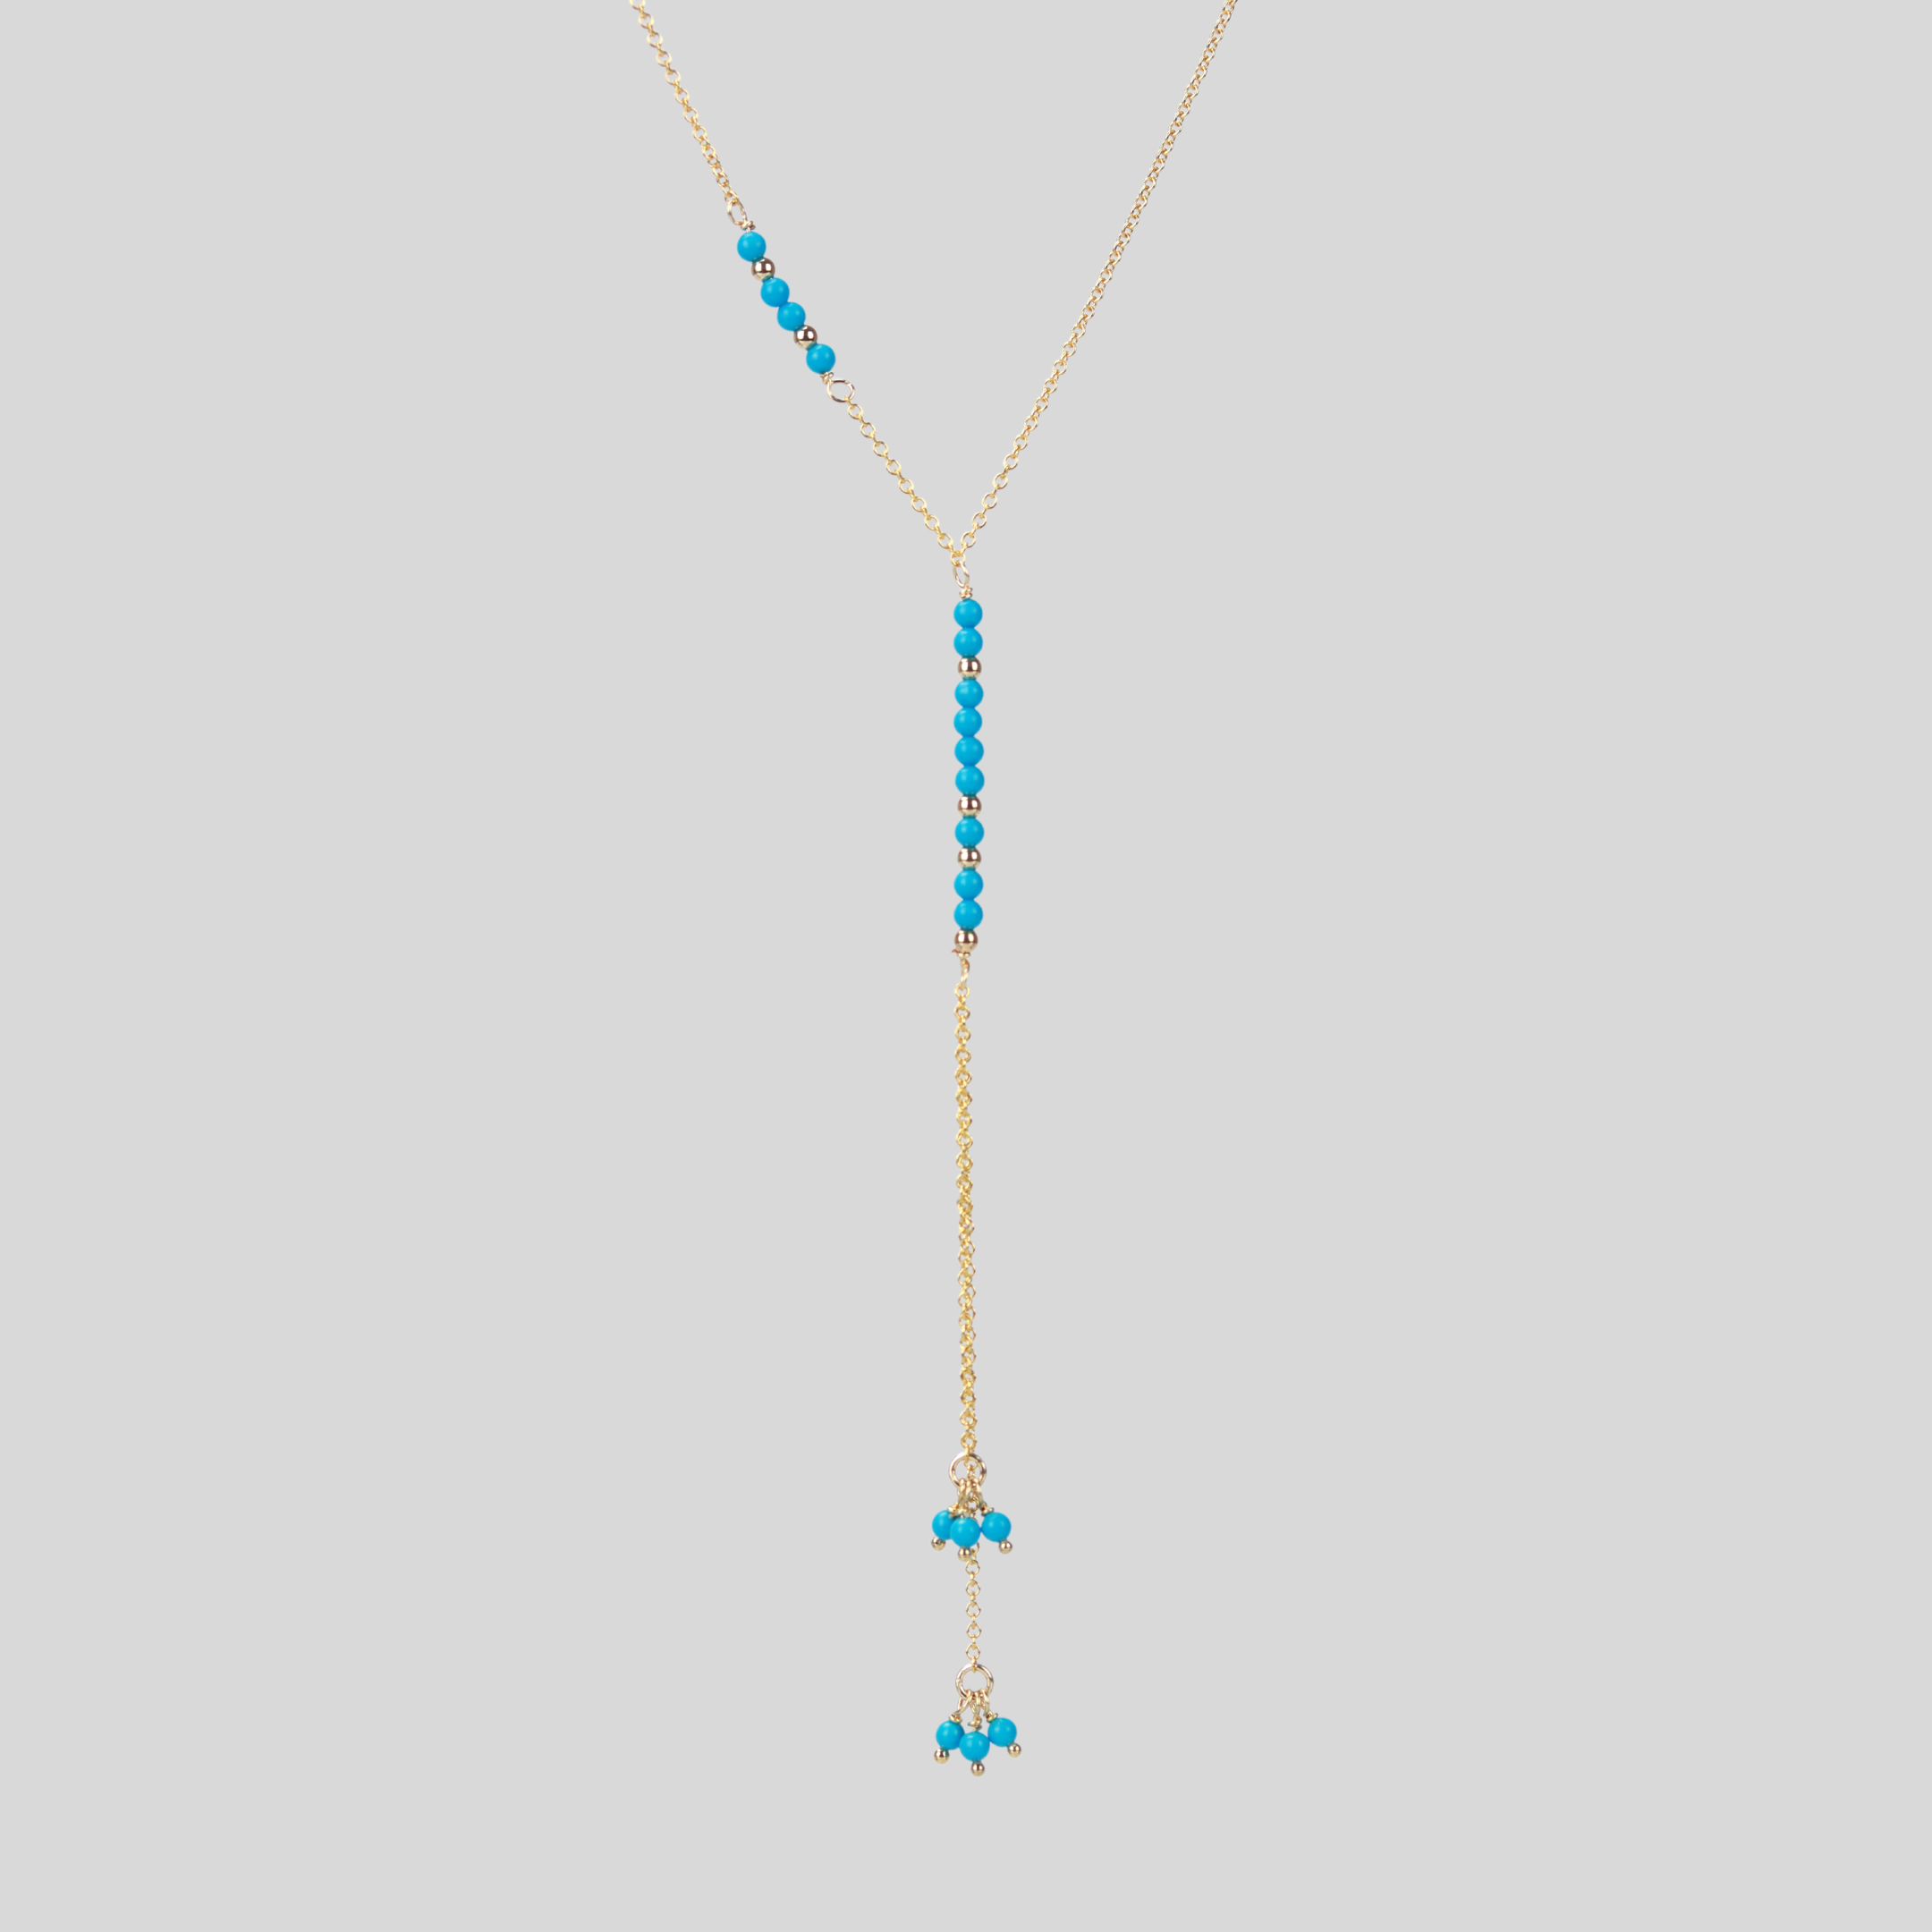 Dainty 14k Gold Filled  Lariat Necklace with Turquoise and gold filled beads